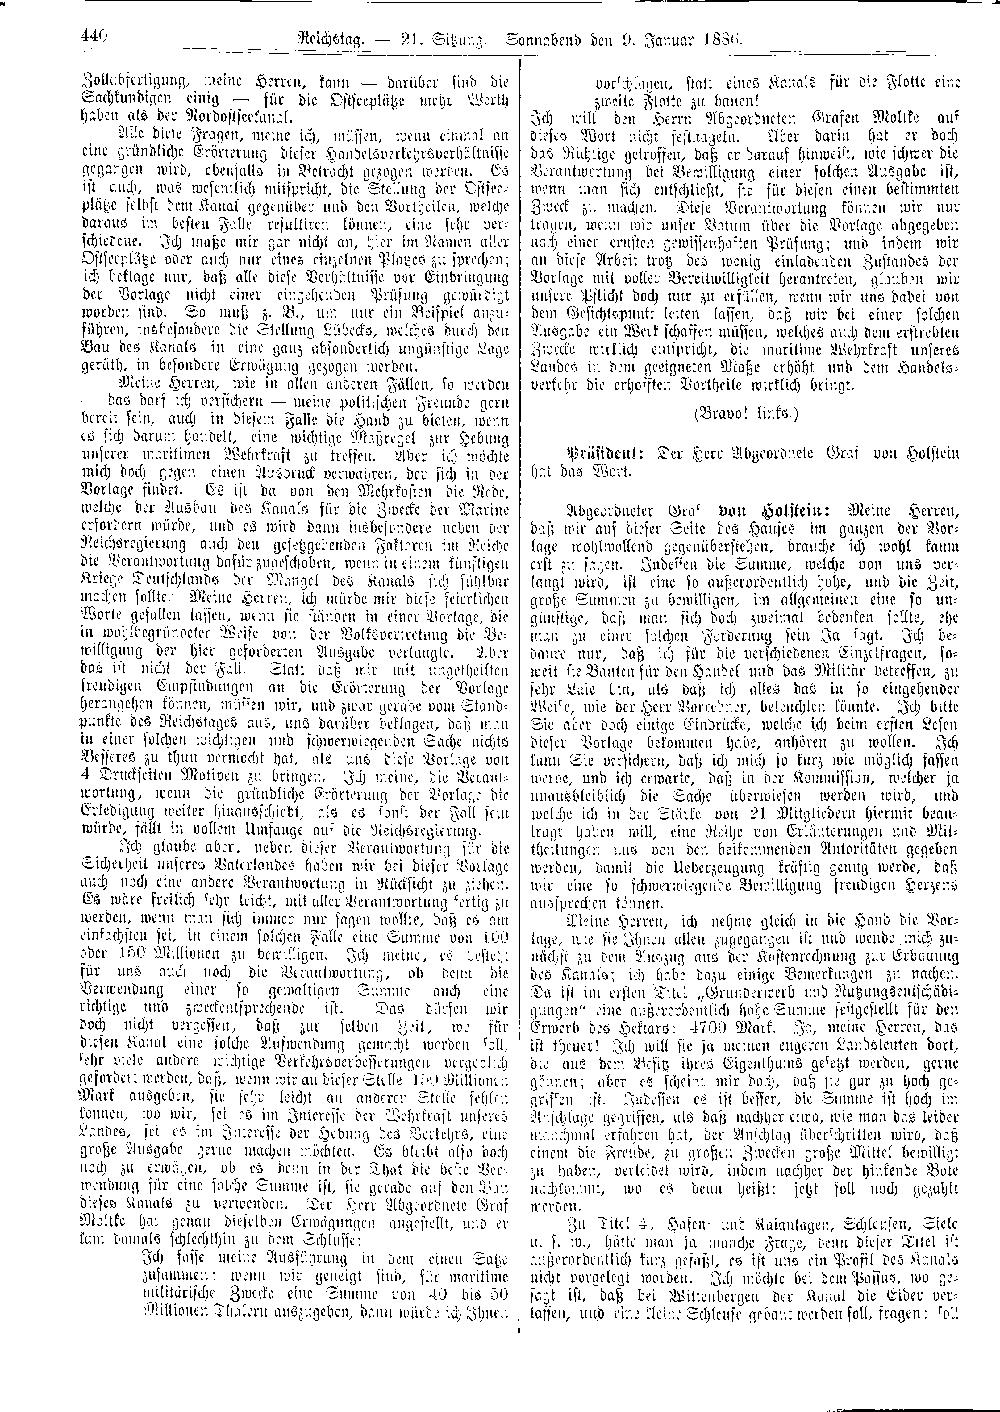 Scan of page 440